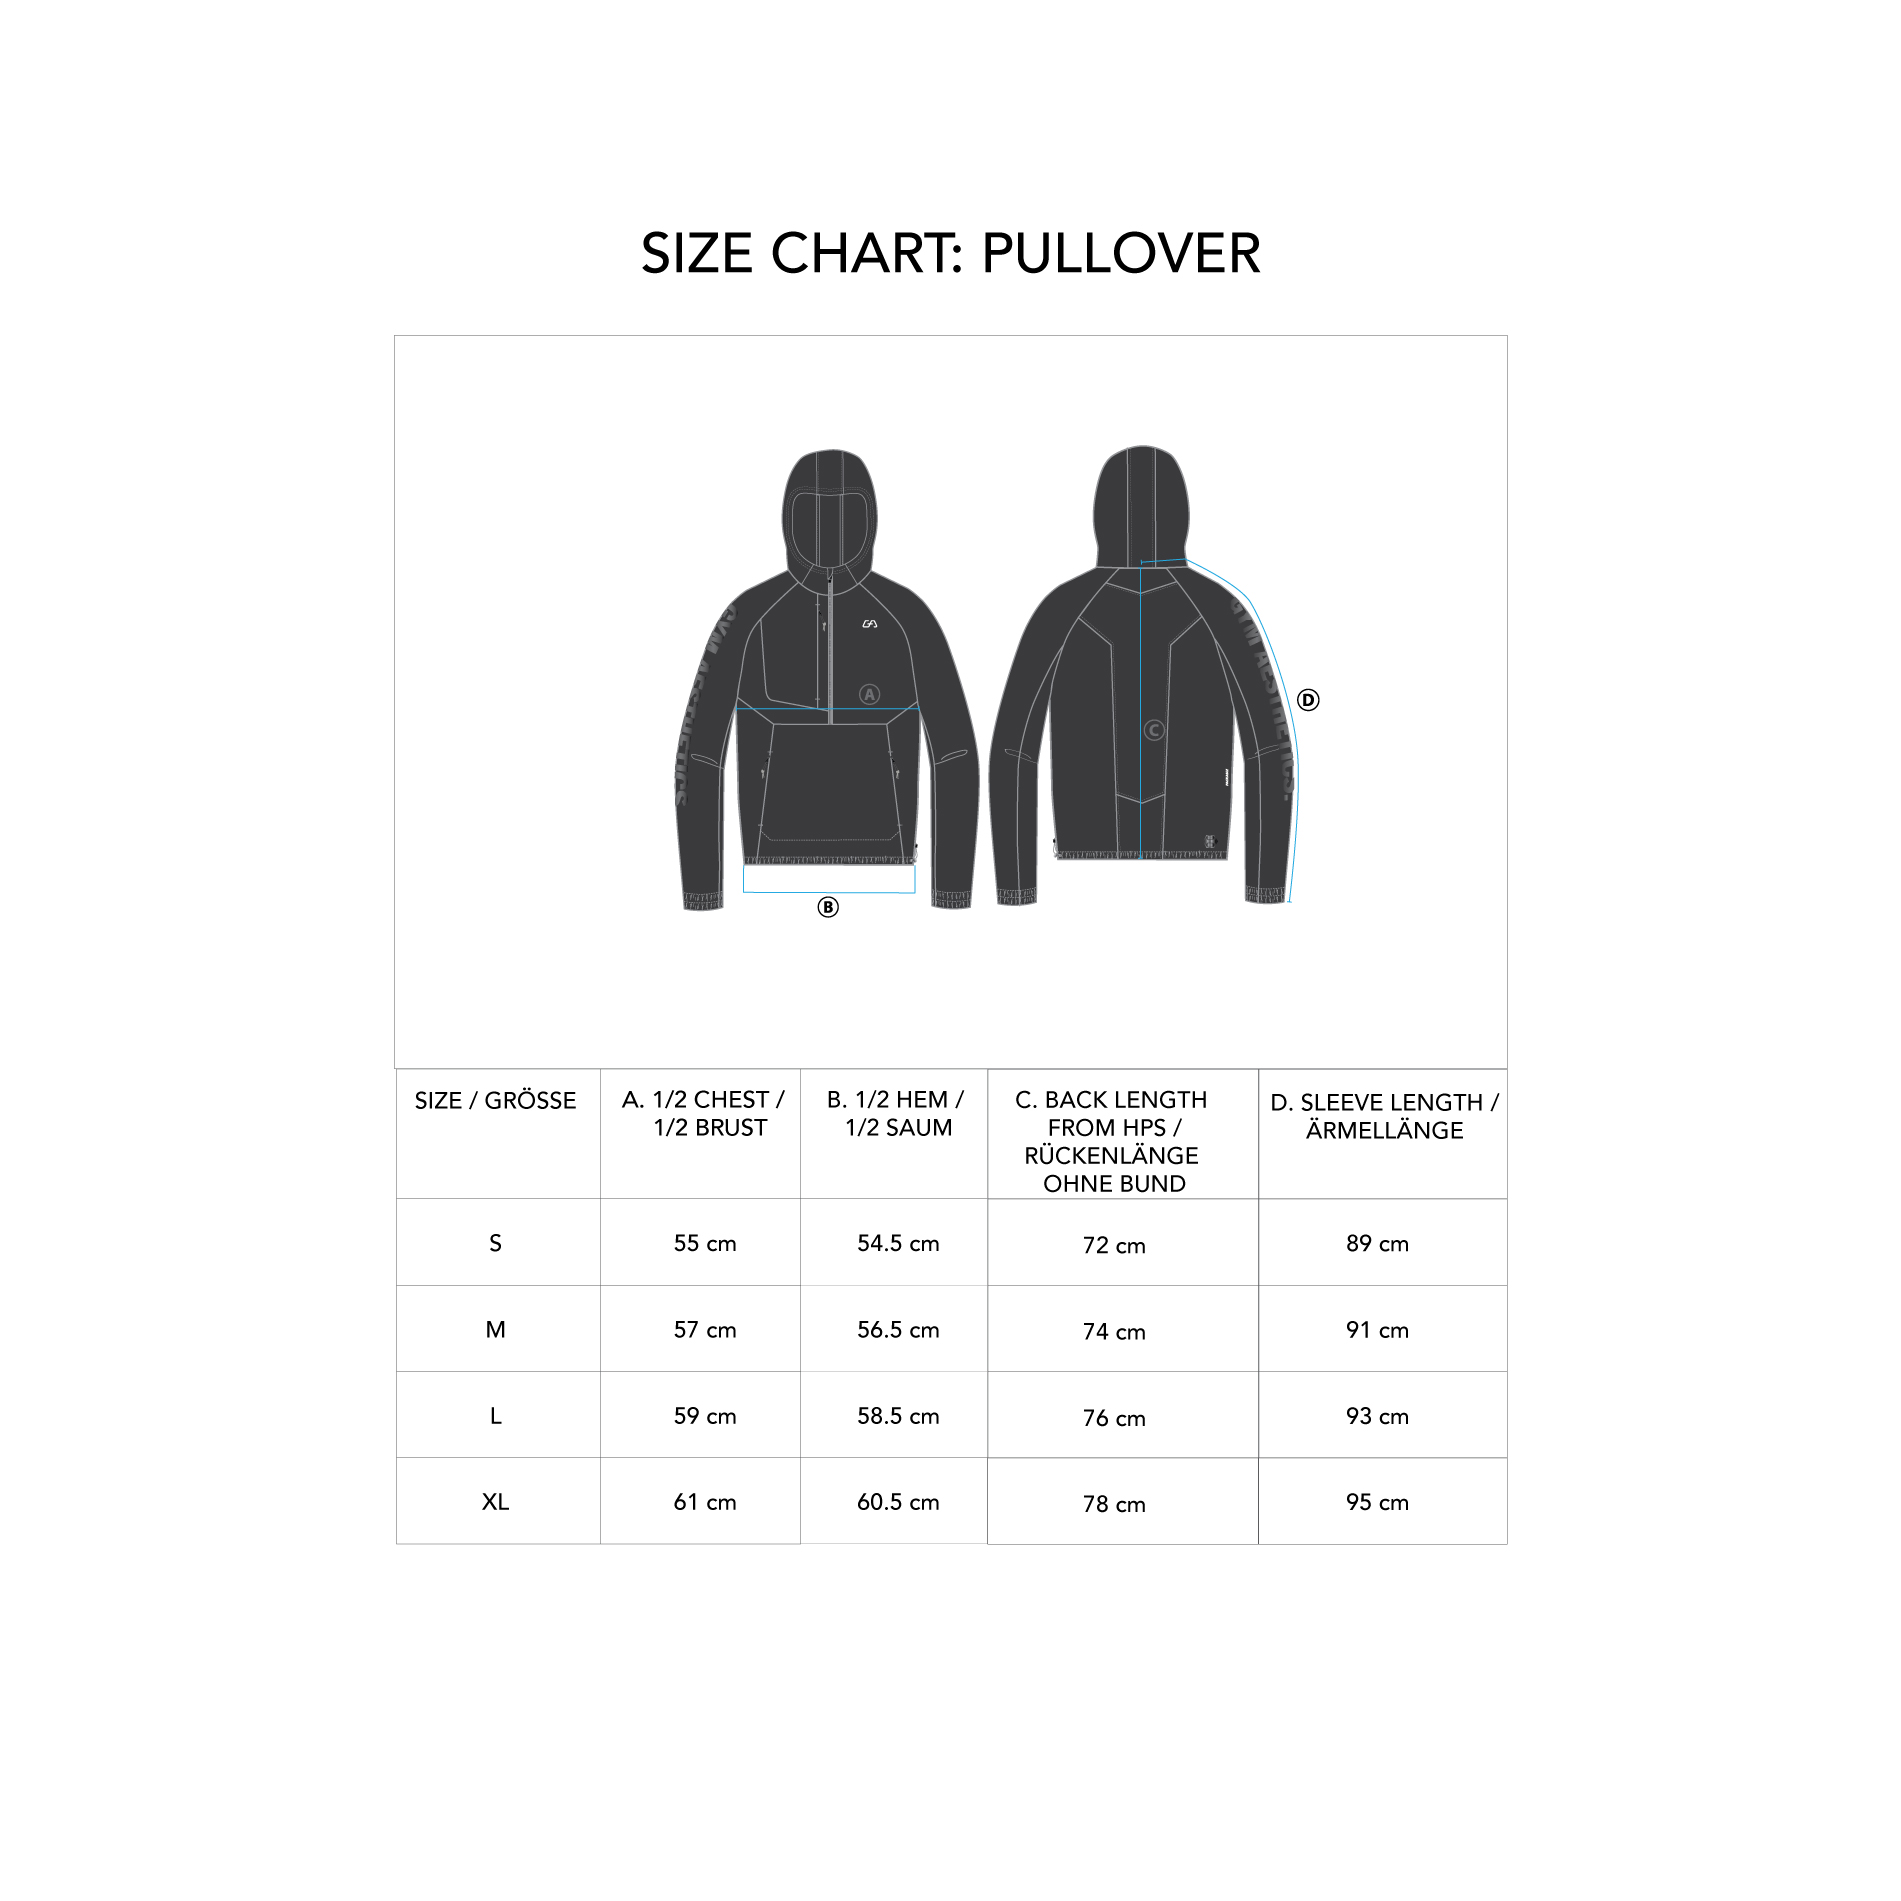 Functional Water Resistant Jacket for Men - size chart